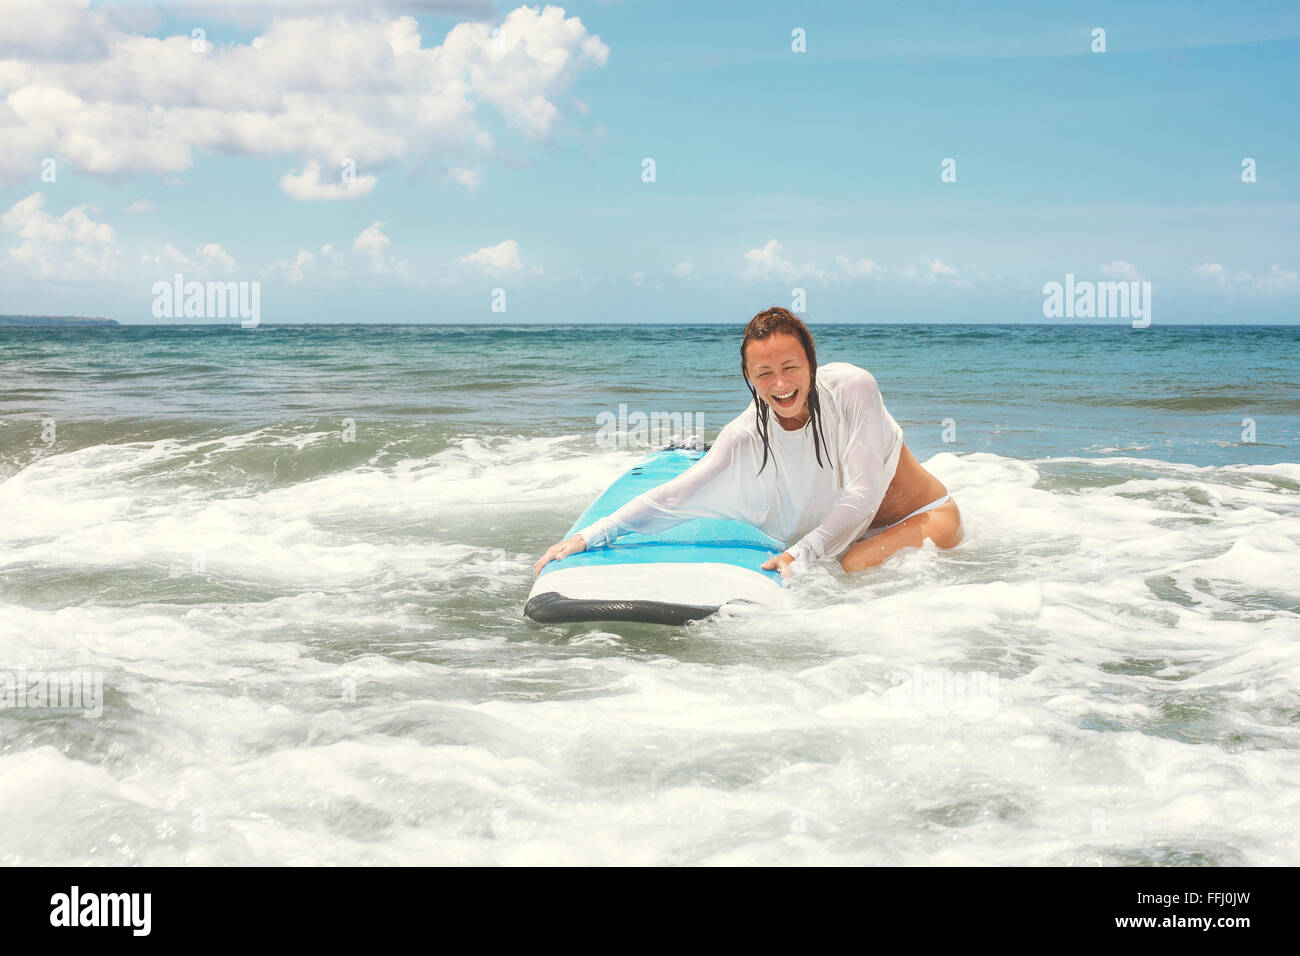 Girl on the waves in the ocean with her Surfboard. Stock image Stock Photo